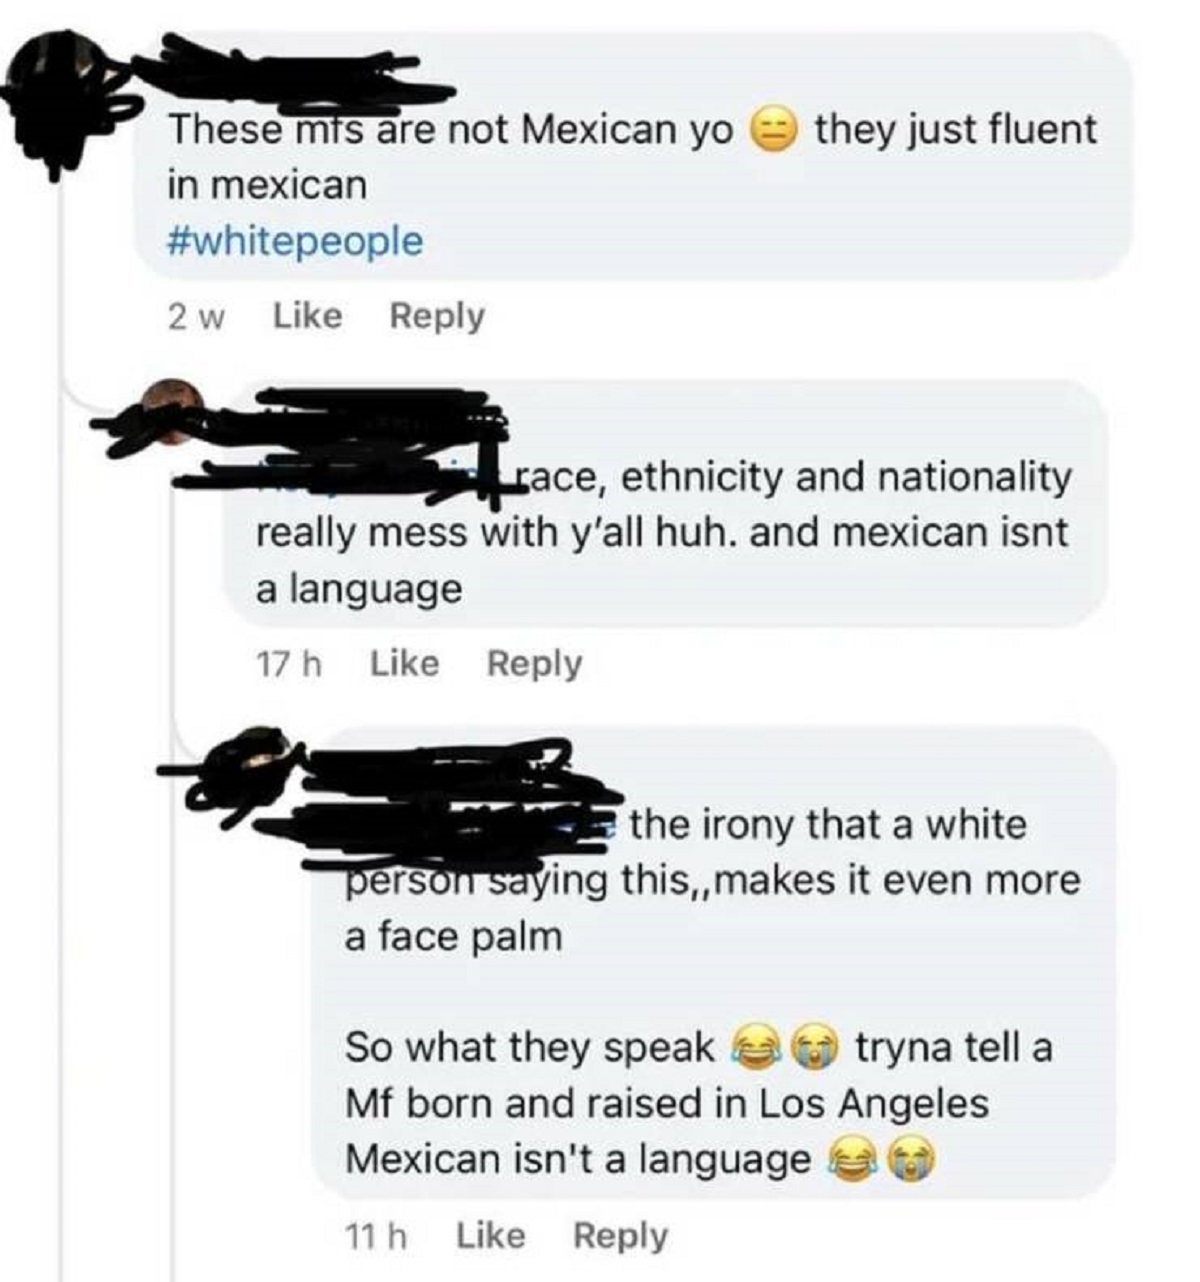 web page - These mts are not Mexican yo in mexican 2 w they just fluent race, ethnicity and nationality. really mess with y'all huh. and mexican isnt a language 17h the irony that a white person saying this,, makes it even more a face palm So what they sp